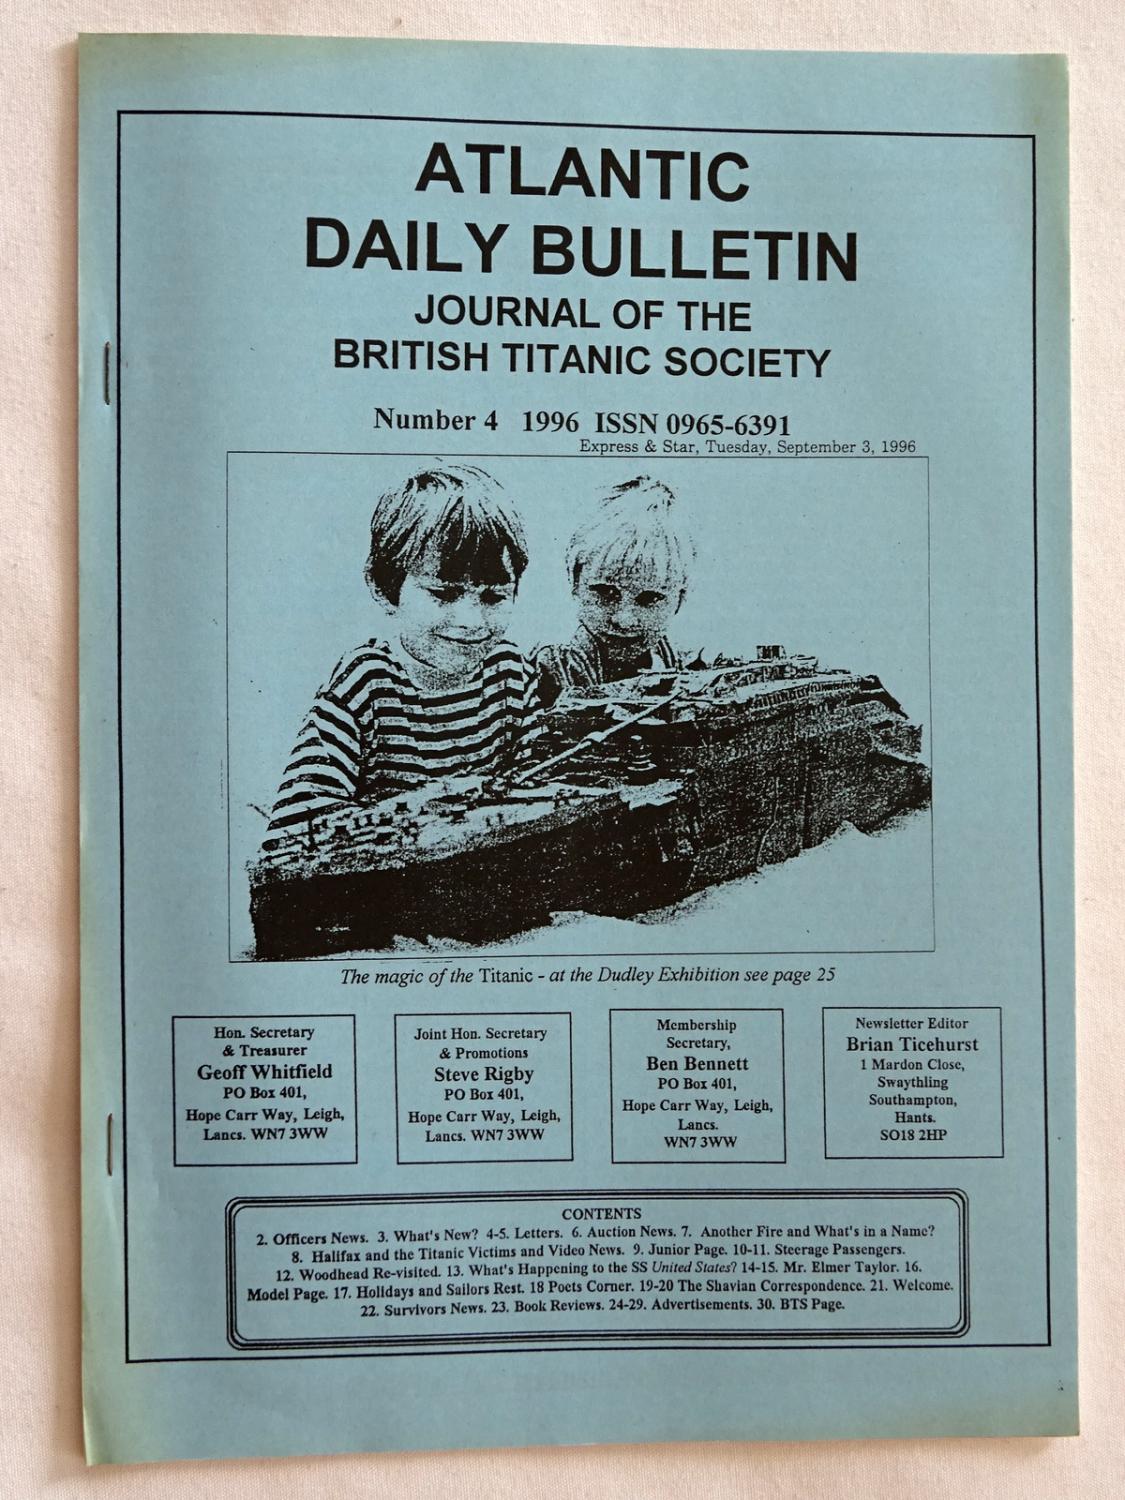 Atlantic Daily Bulletin, 1996 No 4. The Journal of the British Titanic  Society, ISSN 0965-6391 by Ticehurst, Brian J.: Very Good Soft cover (1996)  First Edition | Tony Hutchinson